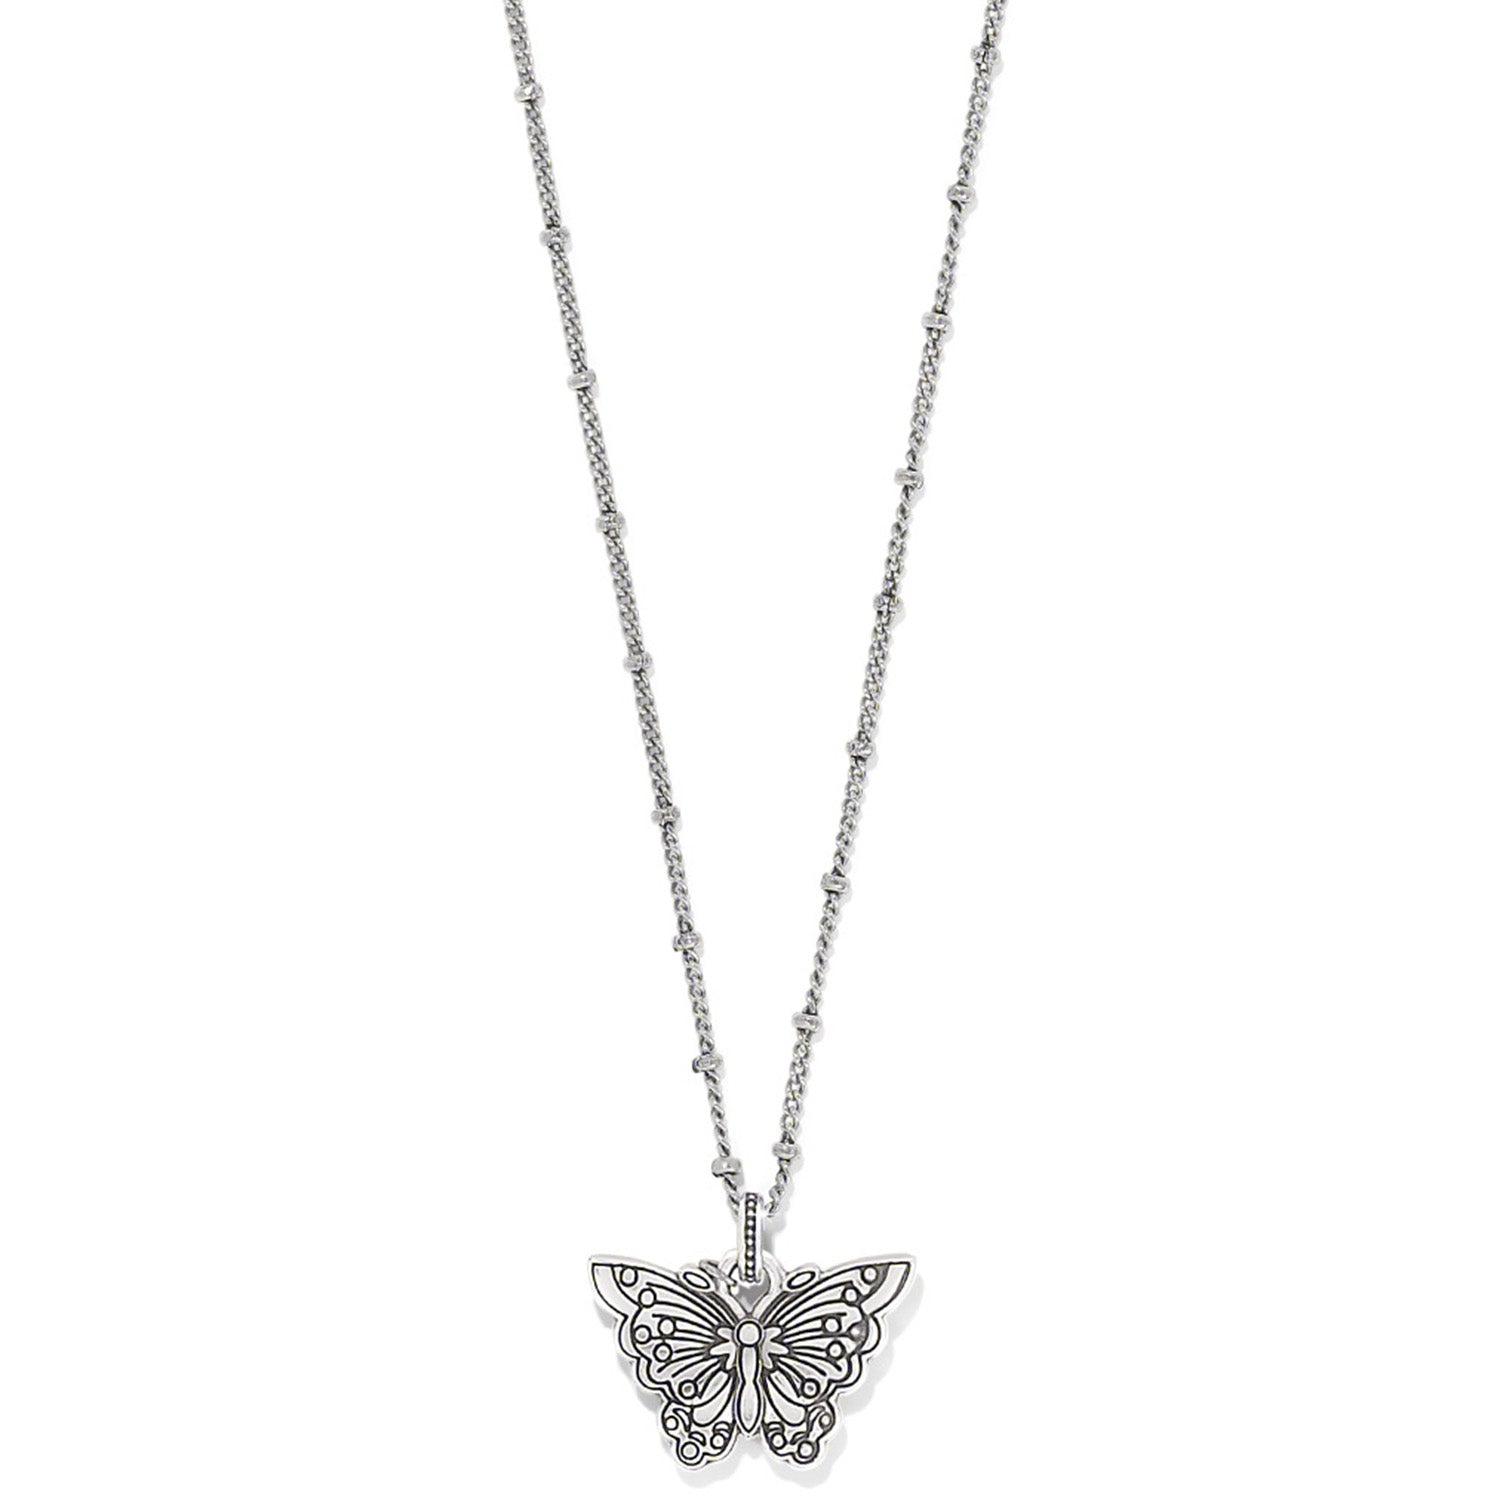 Kyoto in Bloom Butterfly Necklace